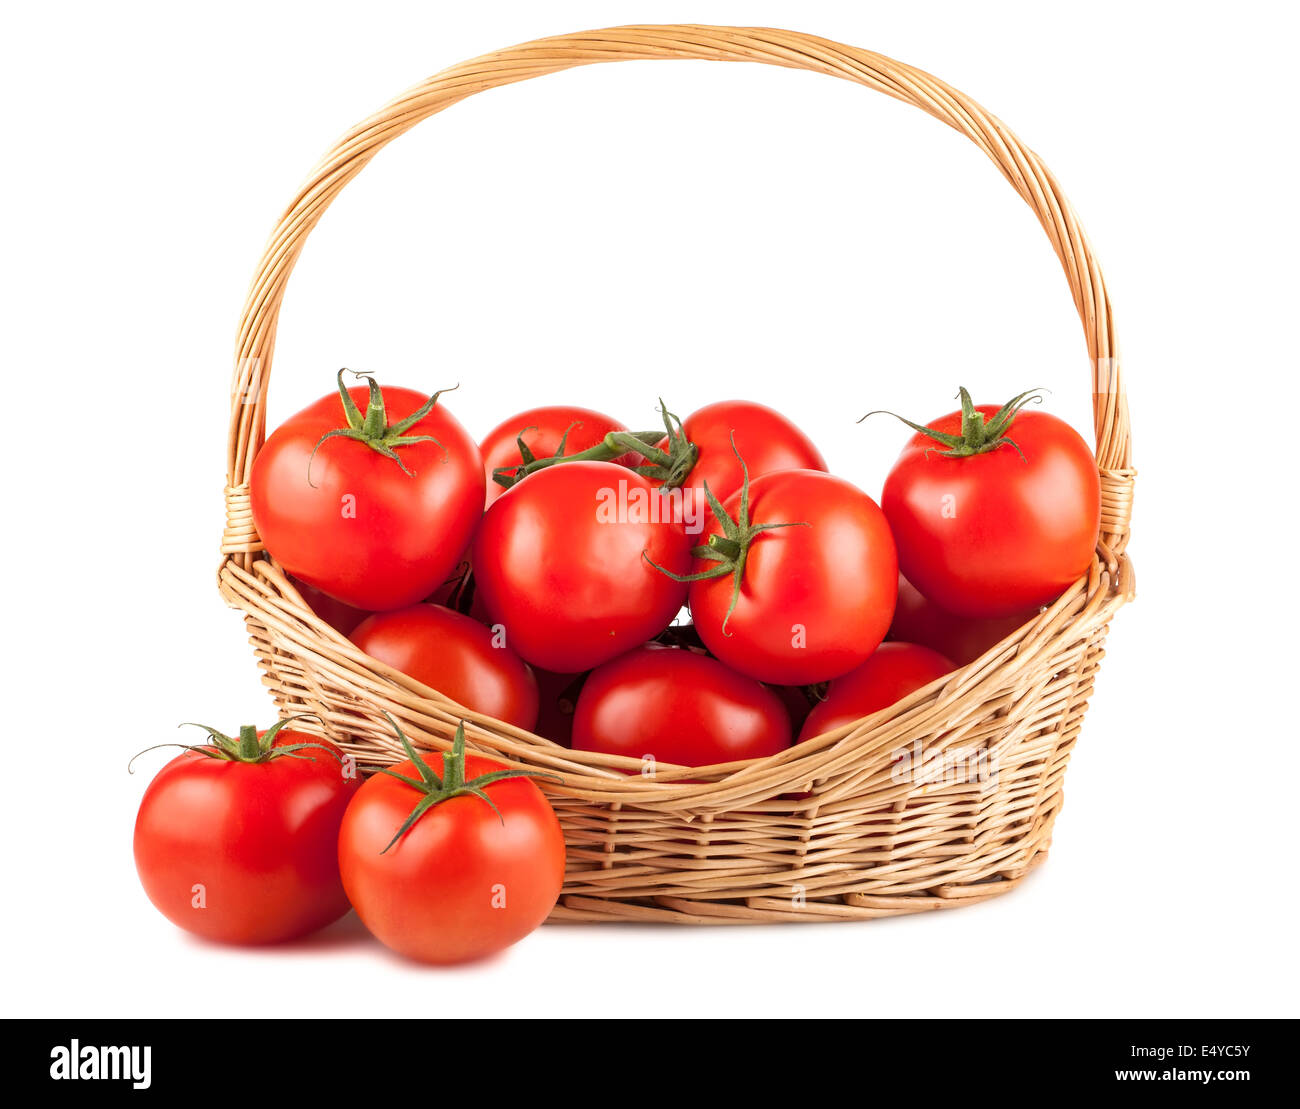 Fresh red tomatoes in wicker basket Stock Photo - Alamy